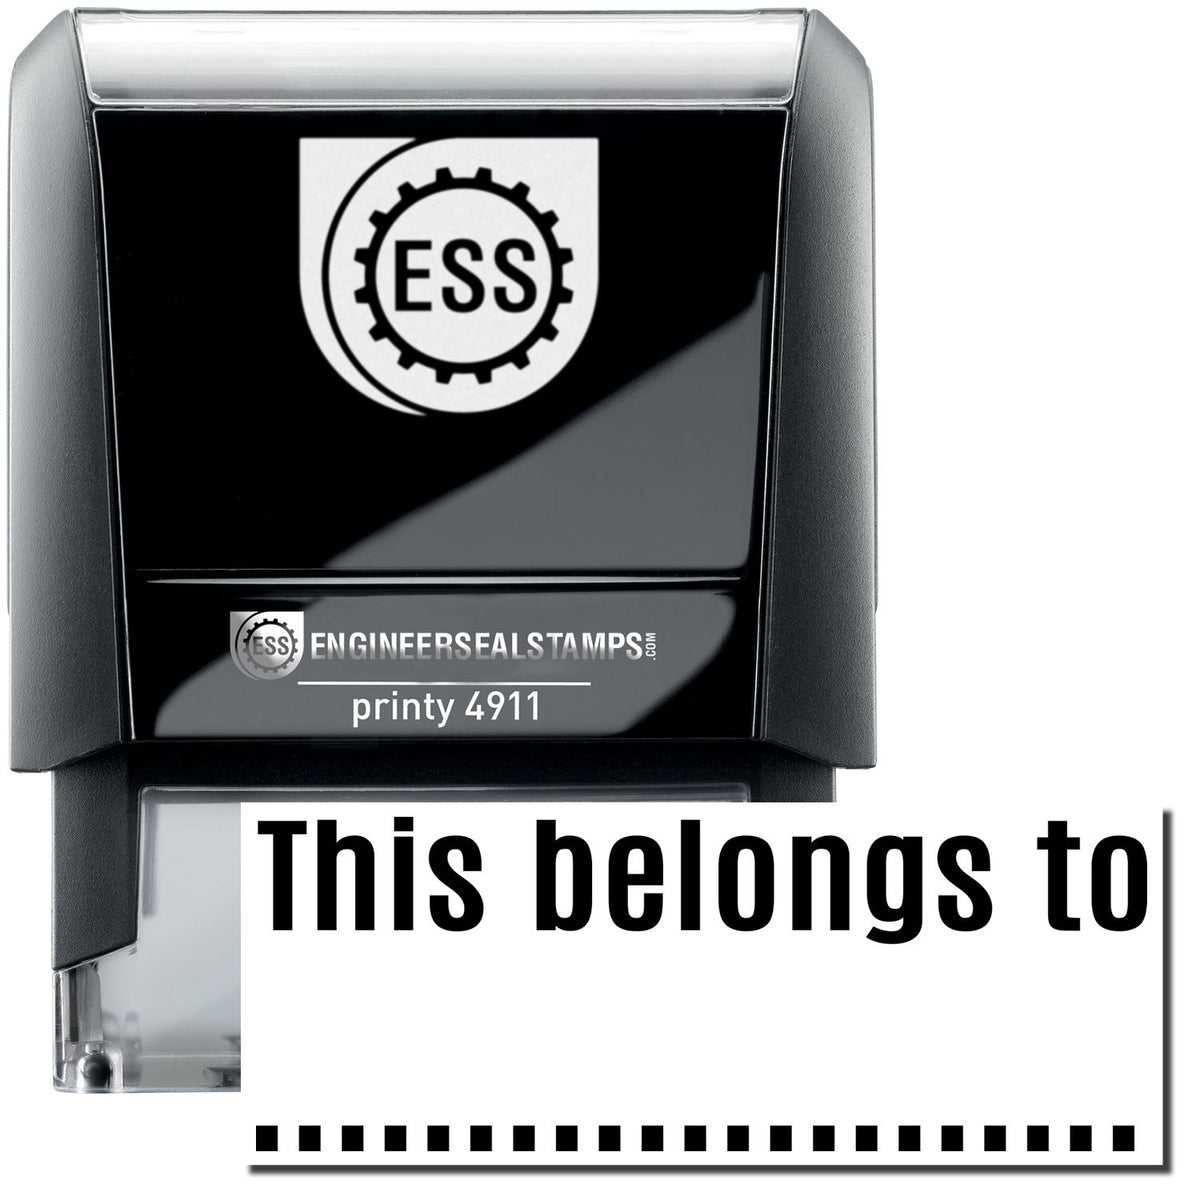 A self-inking stamp with a stamped image showing how the text &quot;This belongs to&quot; with a dotted line underneath is displayed after stamping.